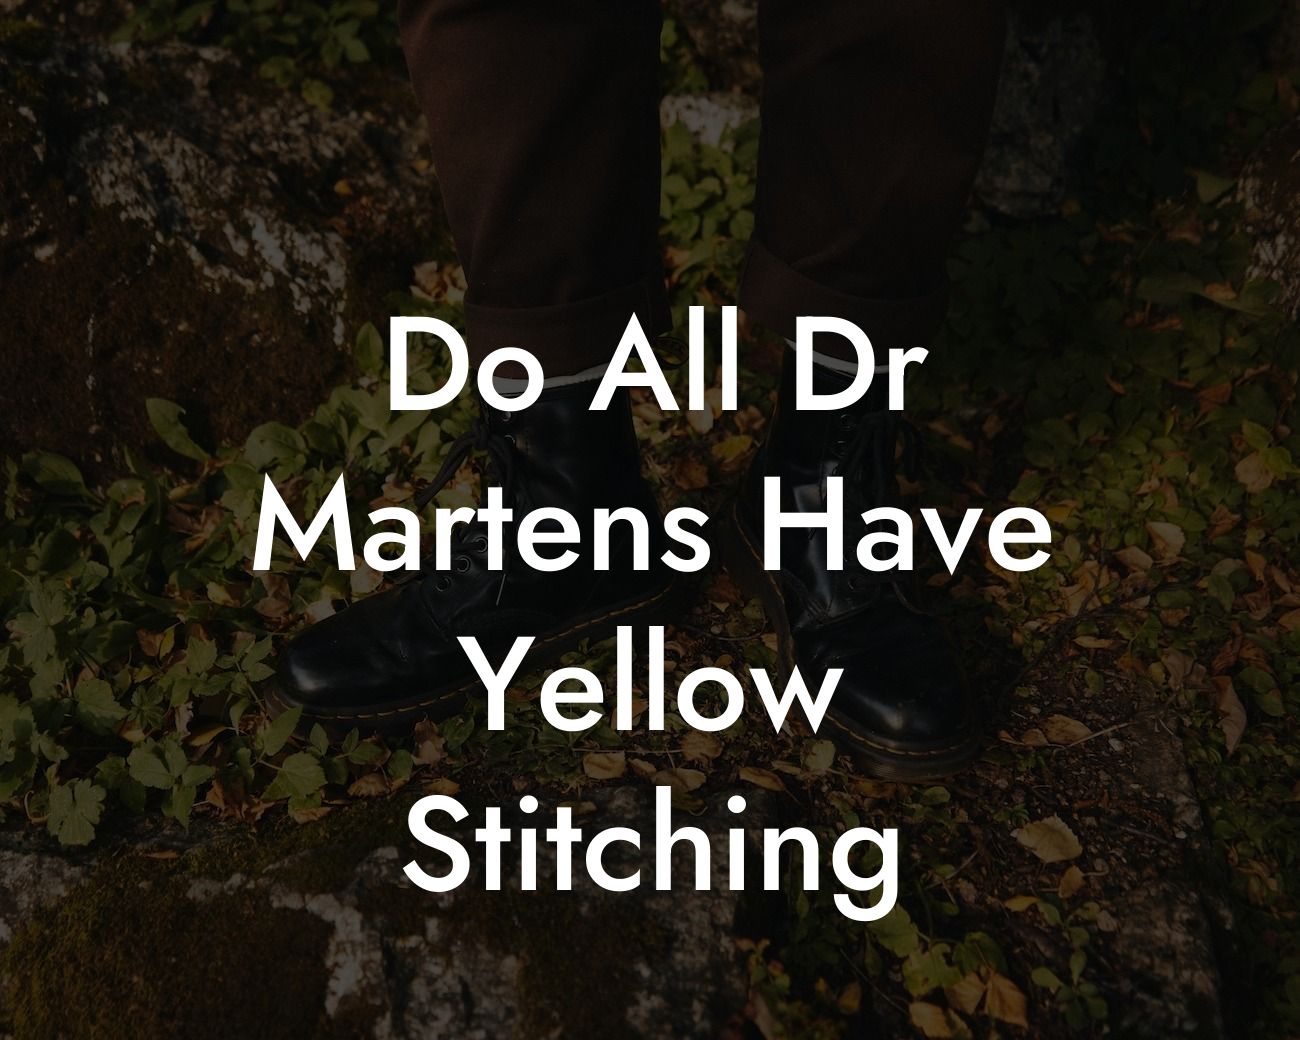 Do All Dr Martens Have Yellow Stitching